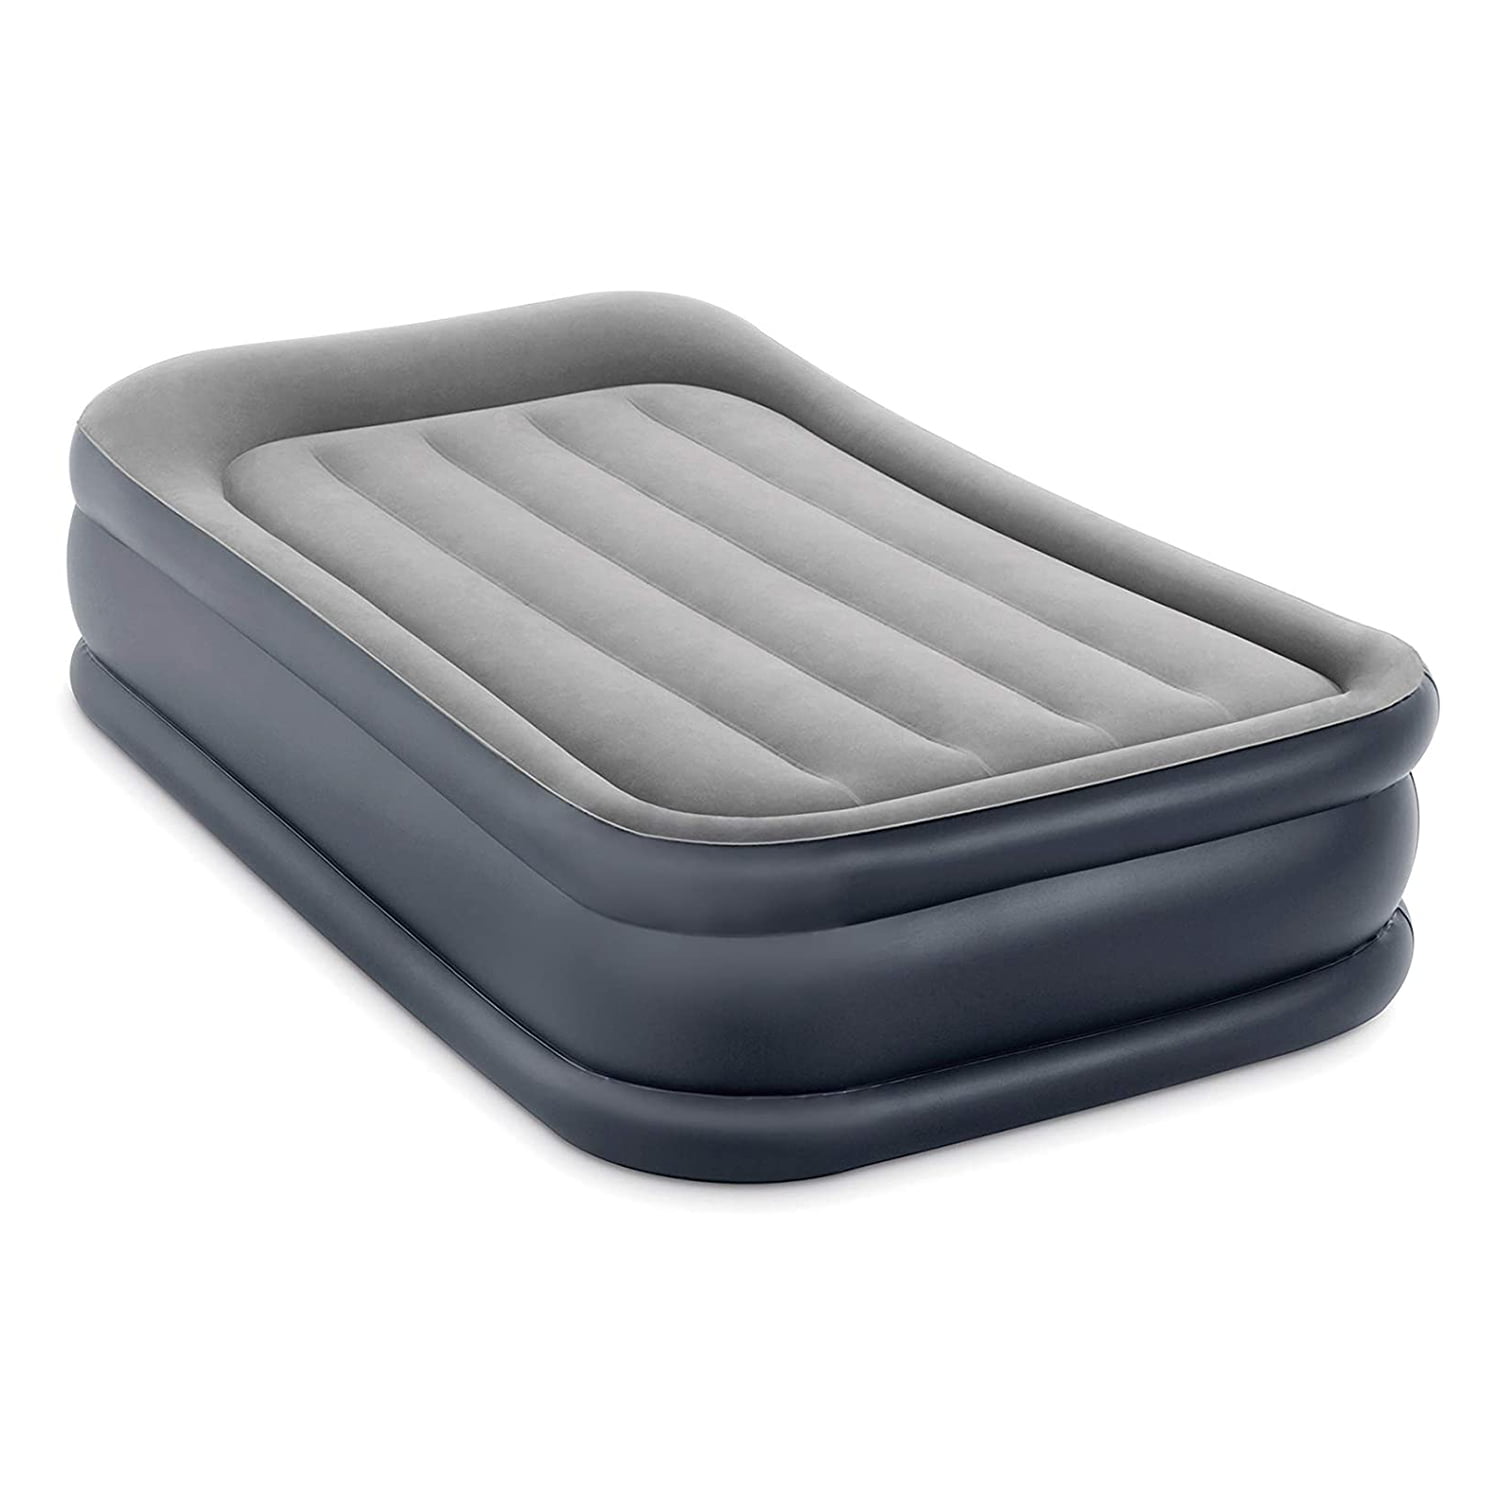 Gray Intex Twin Rest Raised Air Mattress with Built In Pillow and Electric Pump 